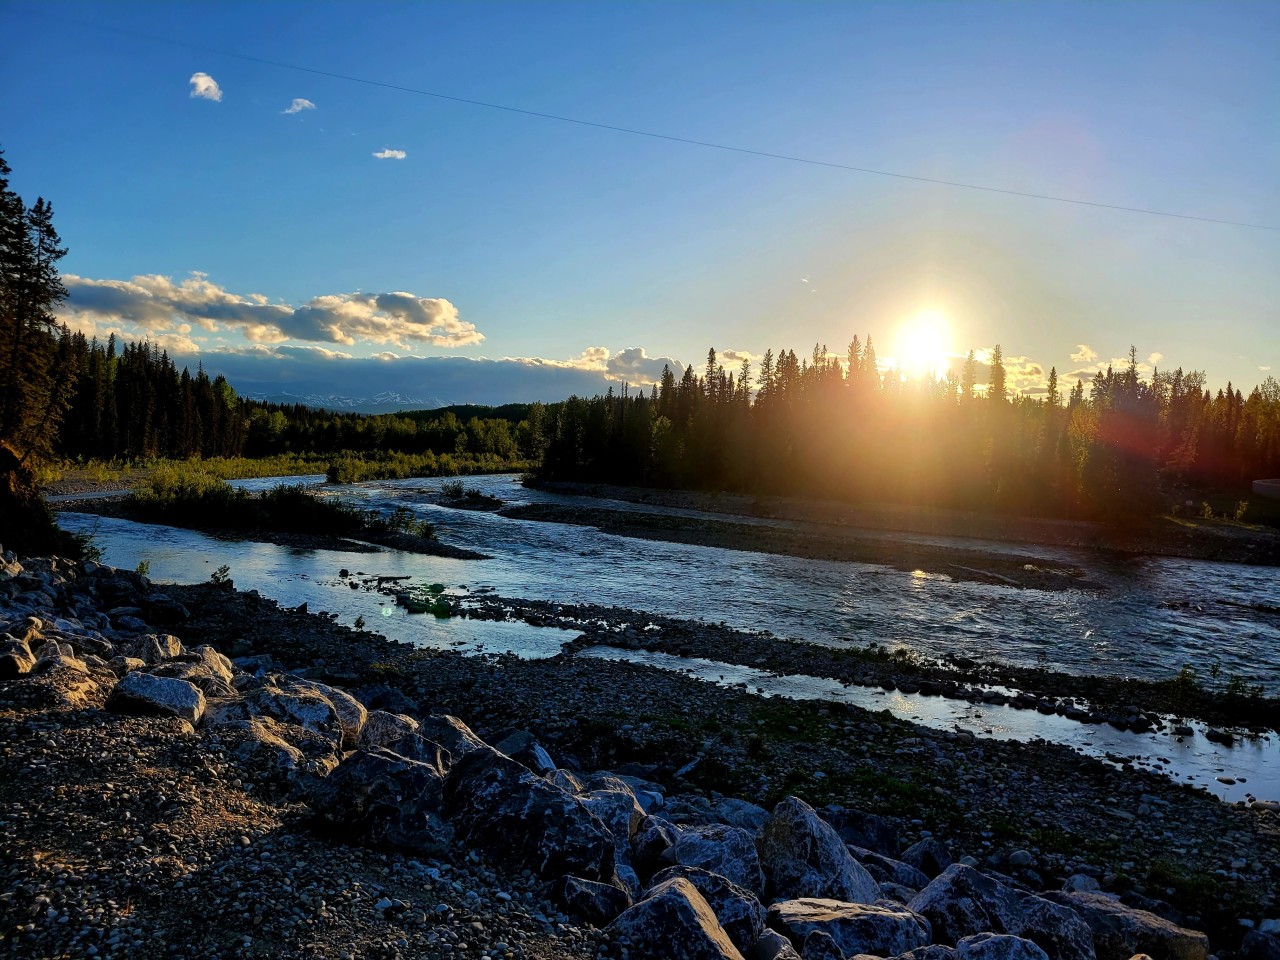 Sunset over the Elbow River - Exploring Kananaskis Country - Kananaskis Alberta Canada 2024-06-16 - The days is quietly ending in Kananaskis Country with a beautiful sunset over the Elbow River. 